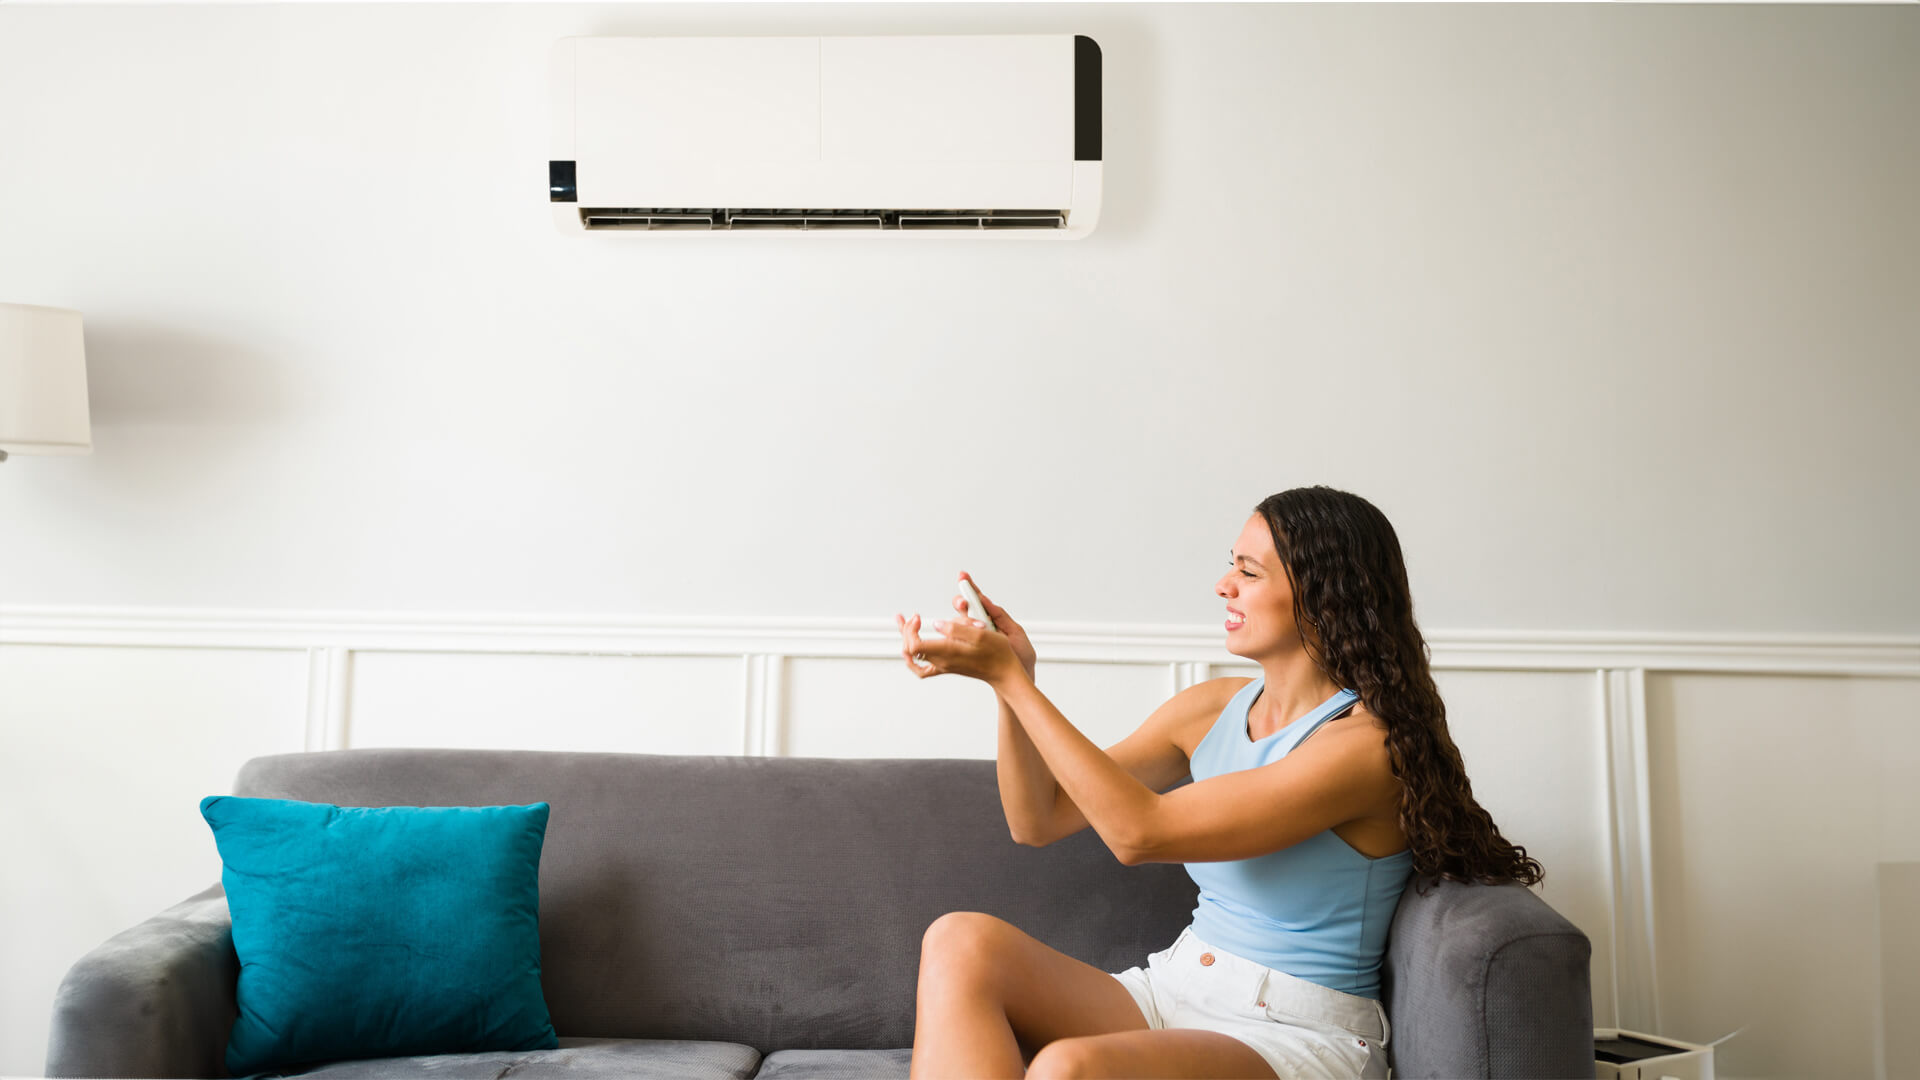 girl-trying-to-click-aircon-remote-to-increase-air-cooling-carrier-philippines-blog-banner-image